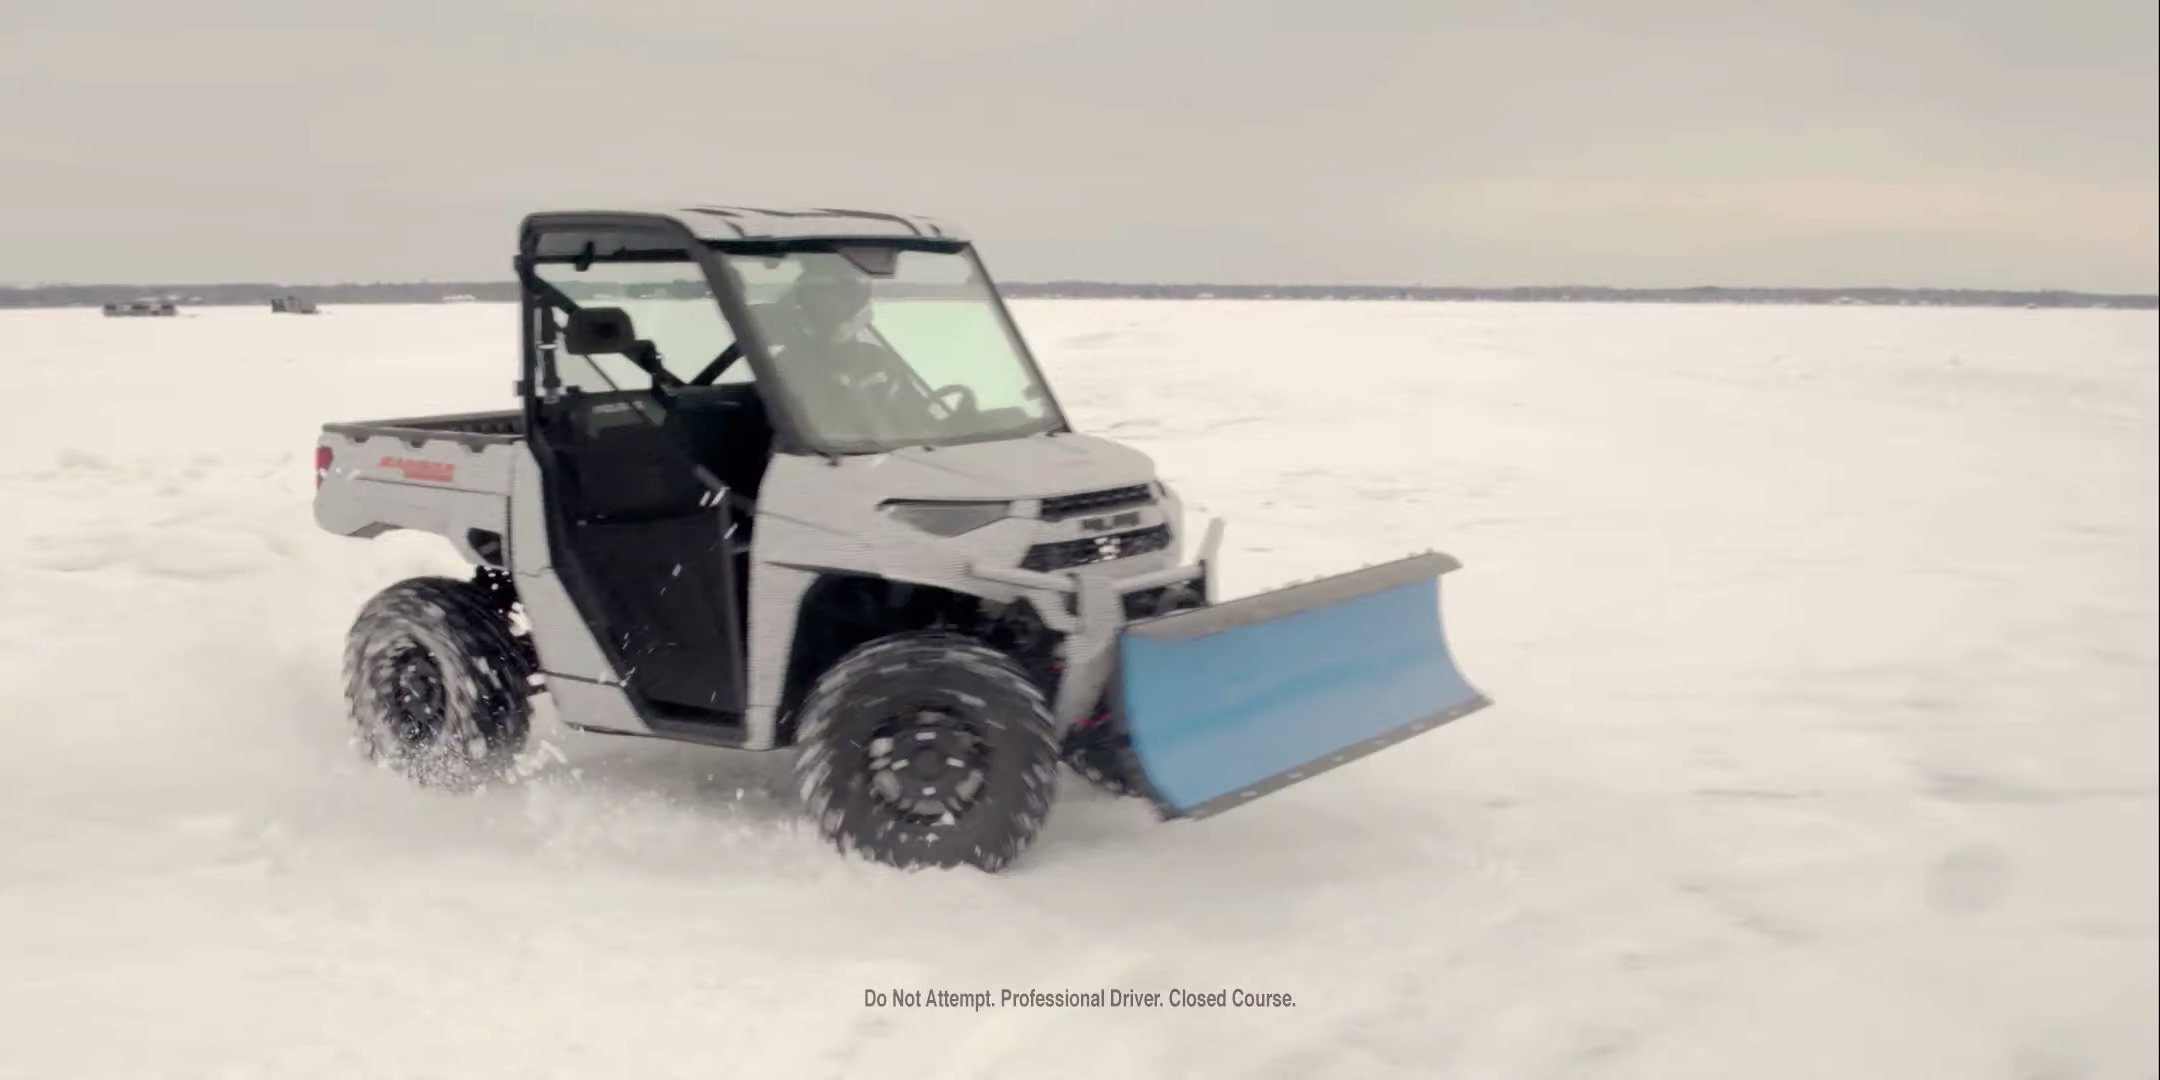 Watch First video shows off new electric Polaris RANGER UTV in action